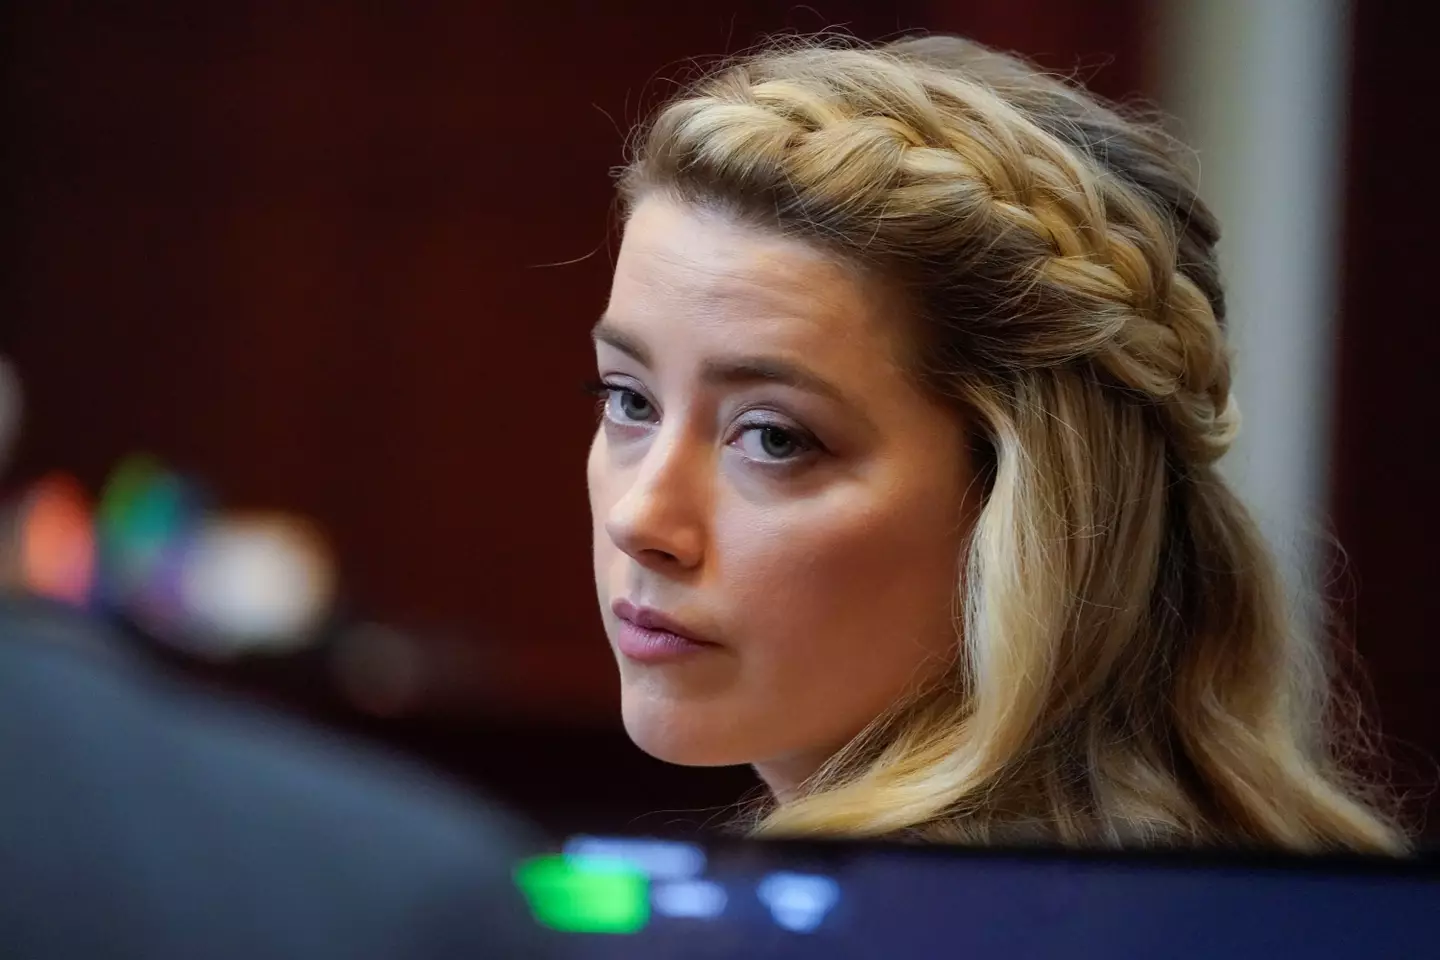 Amber Heard has issued a statement after a jury ruled she did defame Johnny Depp.